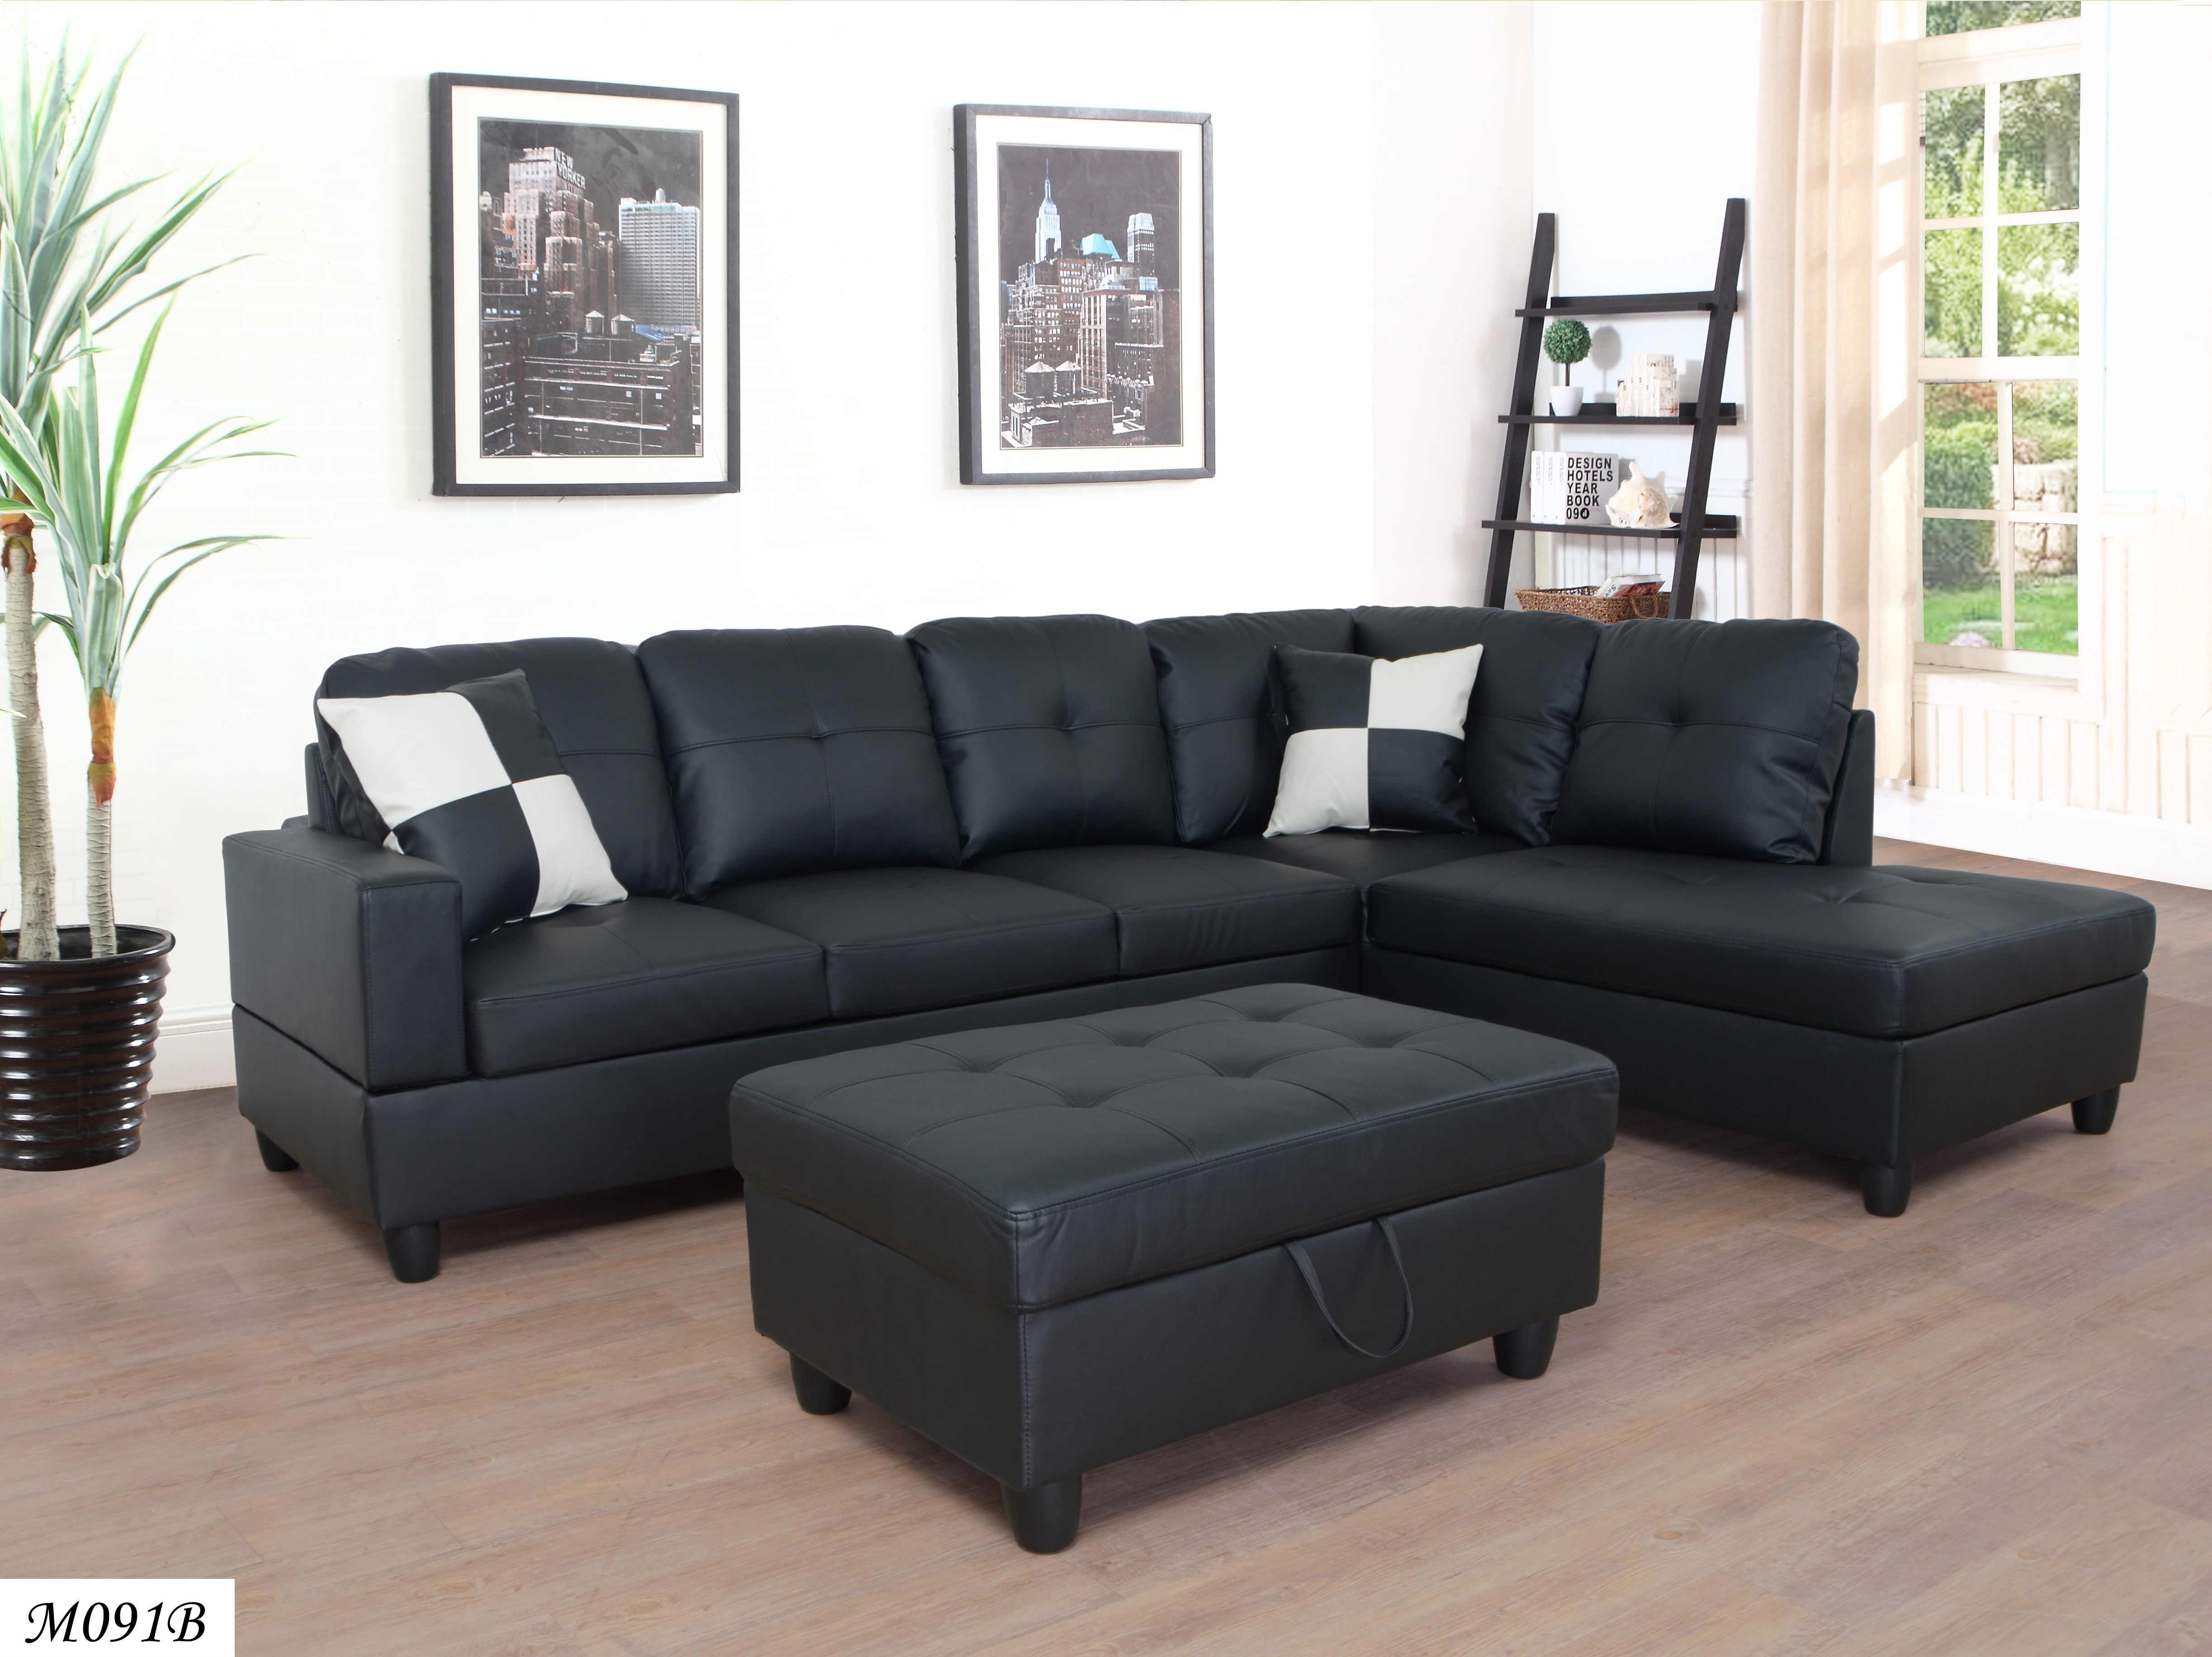 3 PC Sectional Sofa Set, (Black) Faux Leather Right -Facing Sofa with Free Storage Ottoman-CASAINC